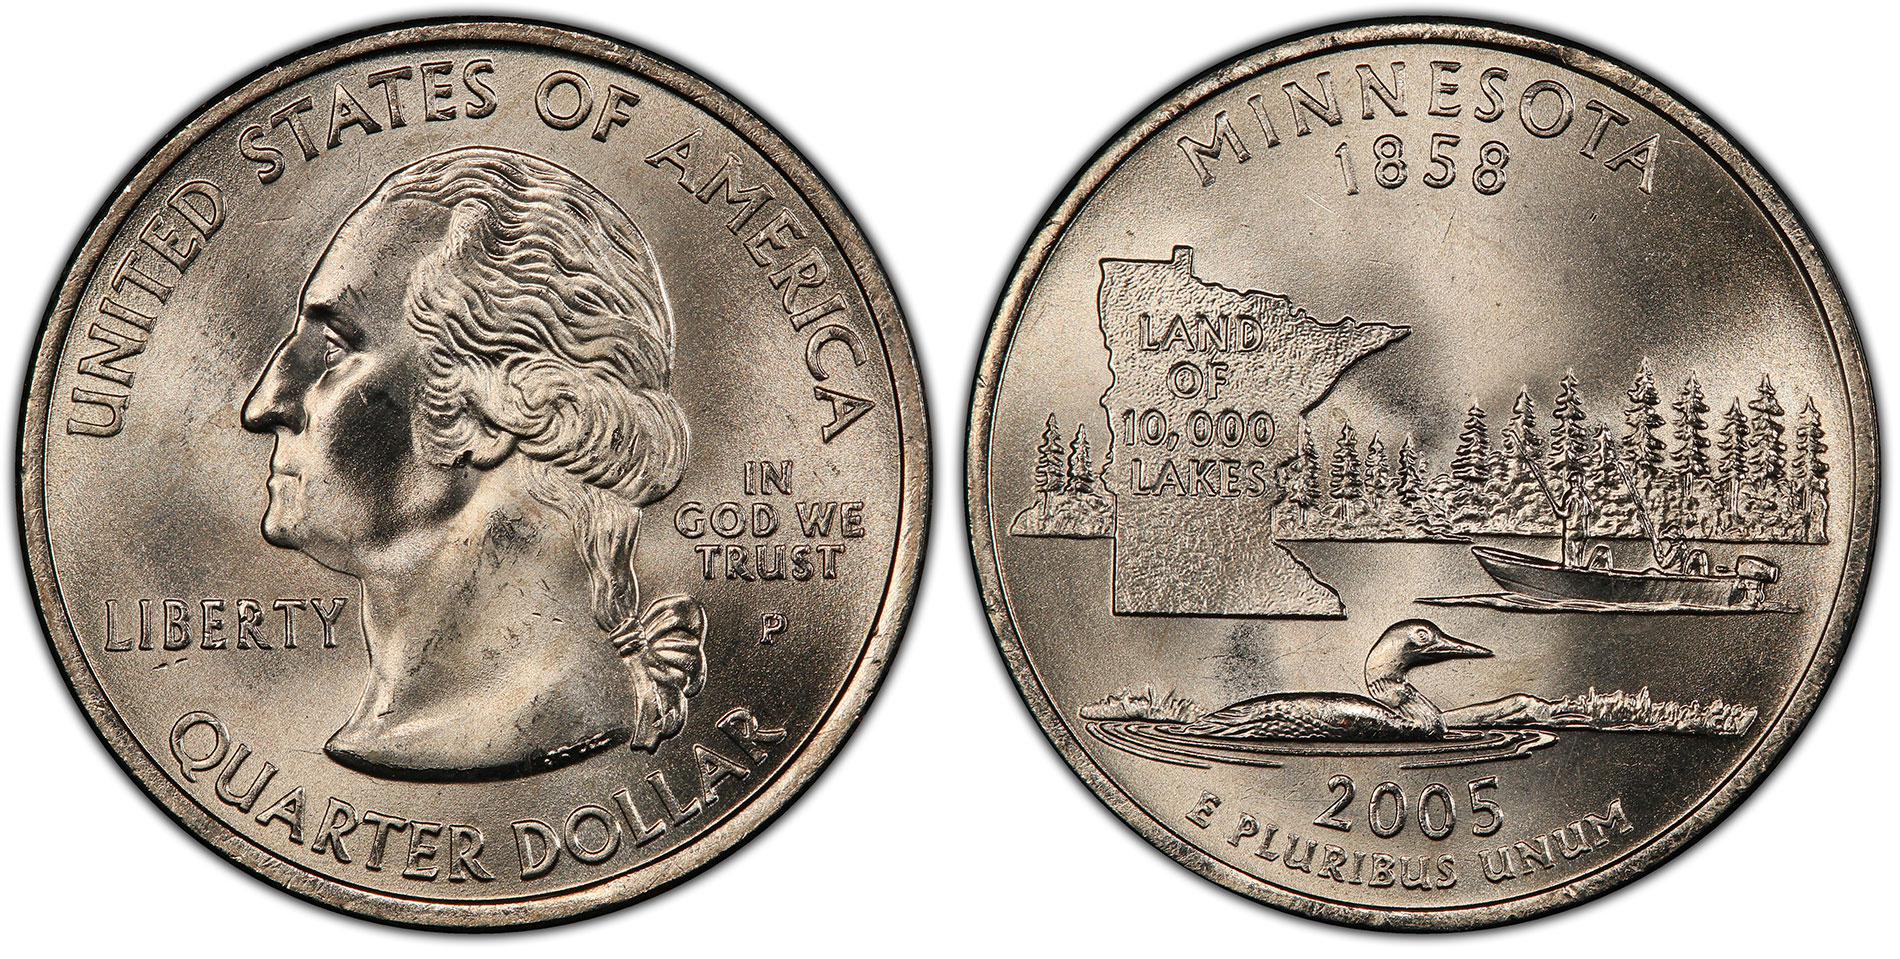 Download The 2005 Doubled Die Minnesota Quarter